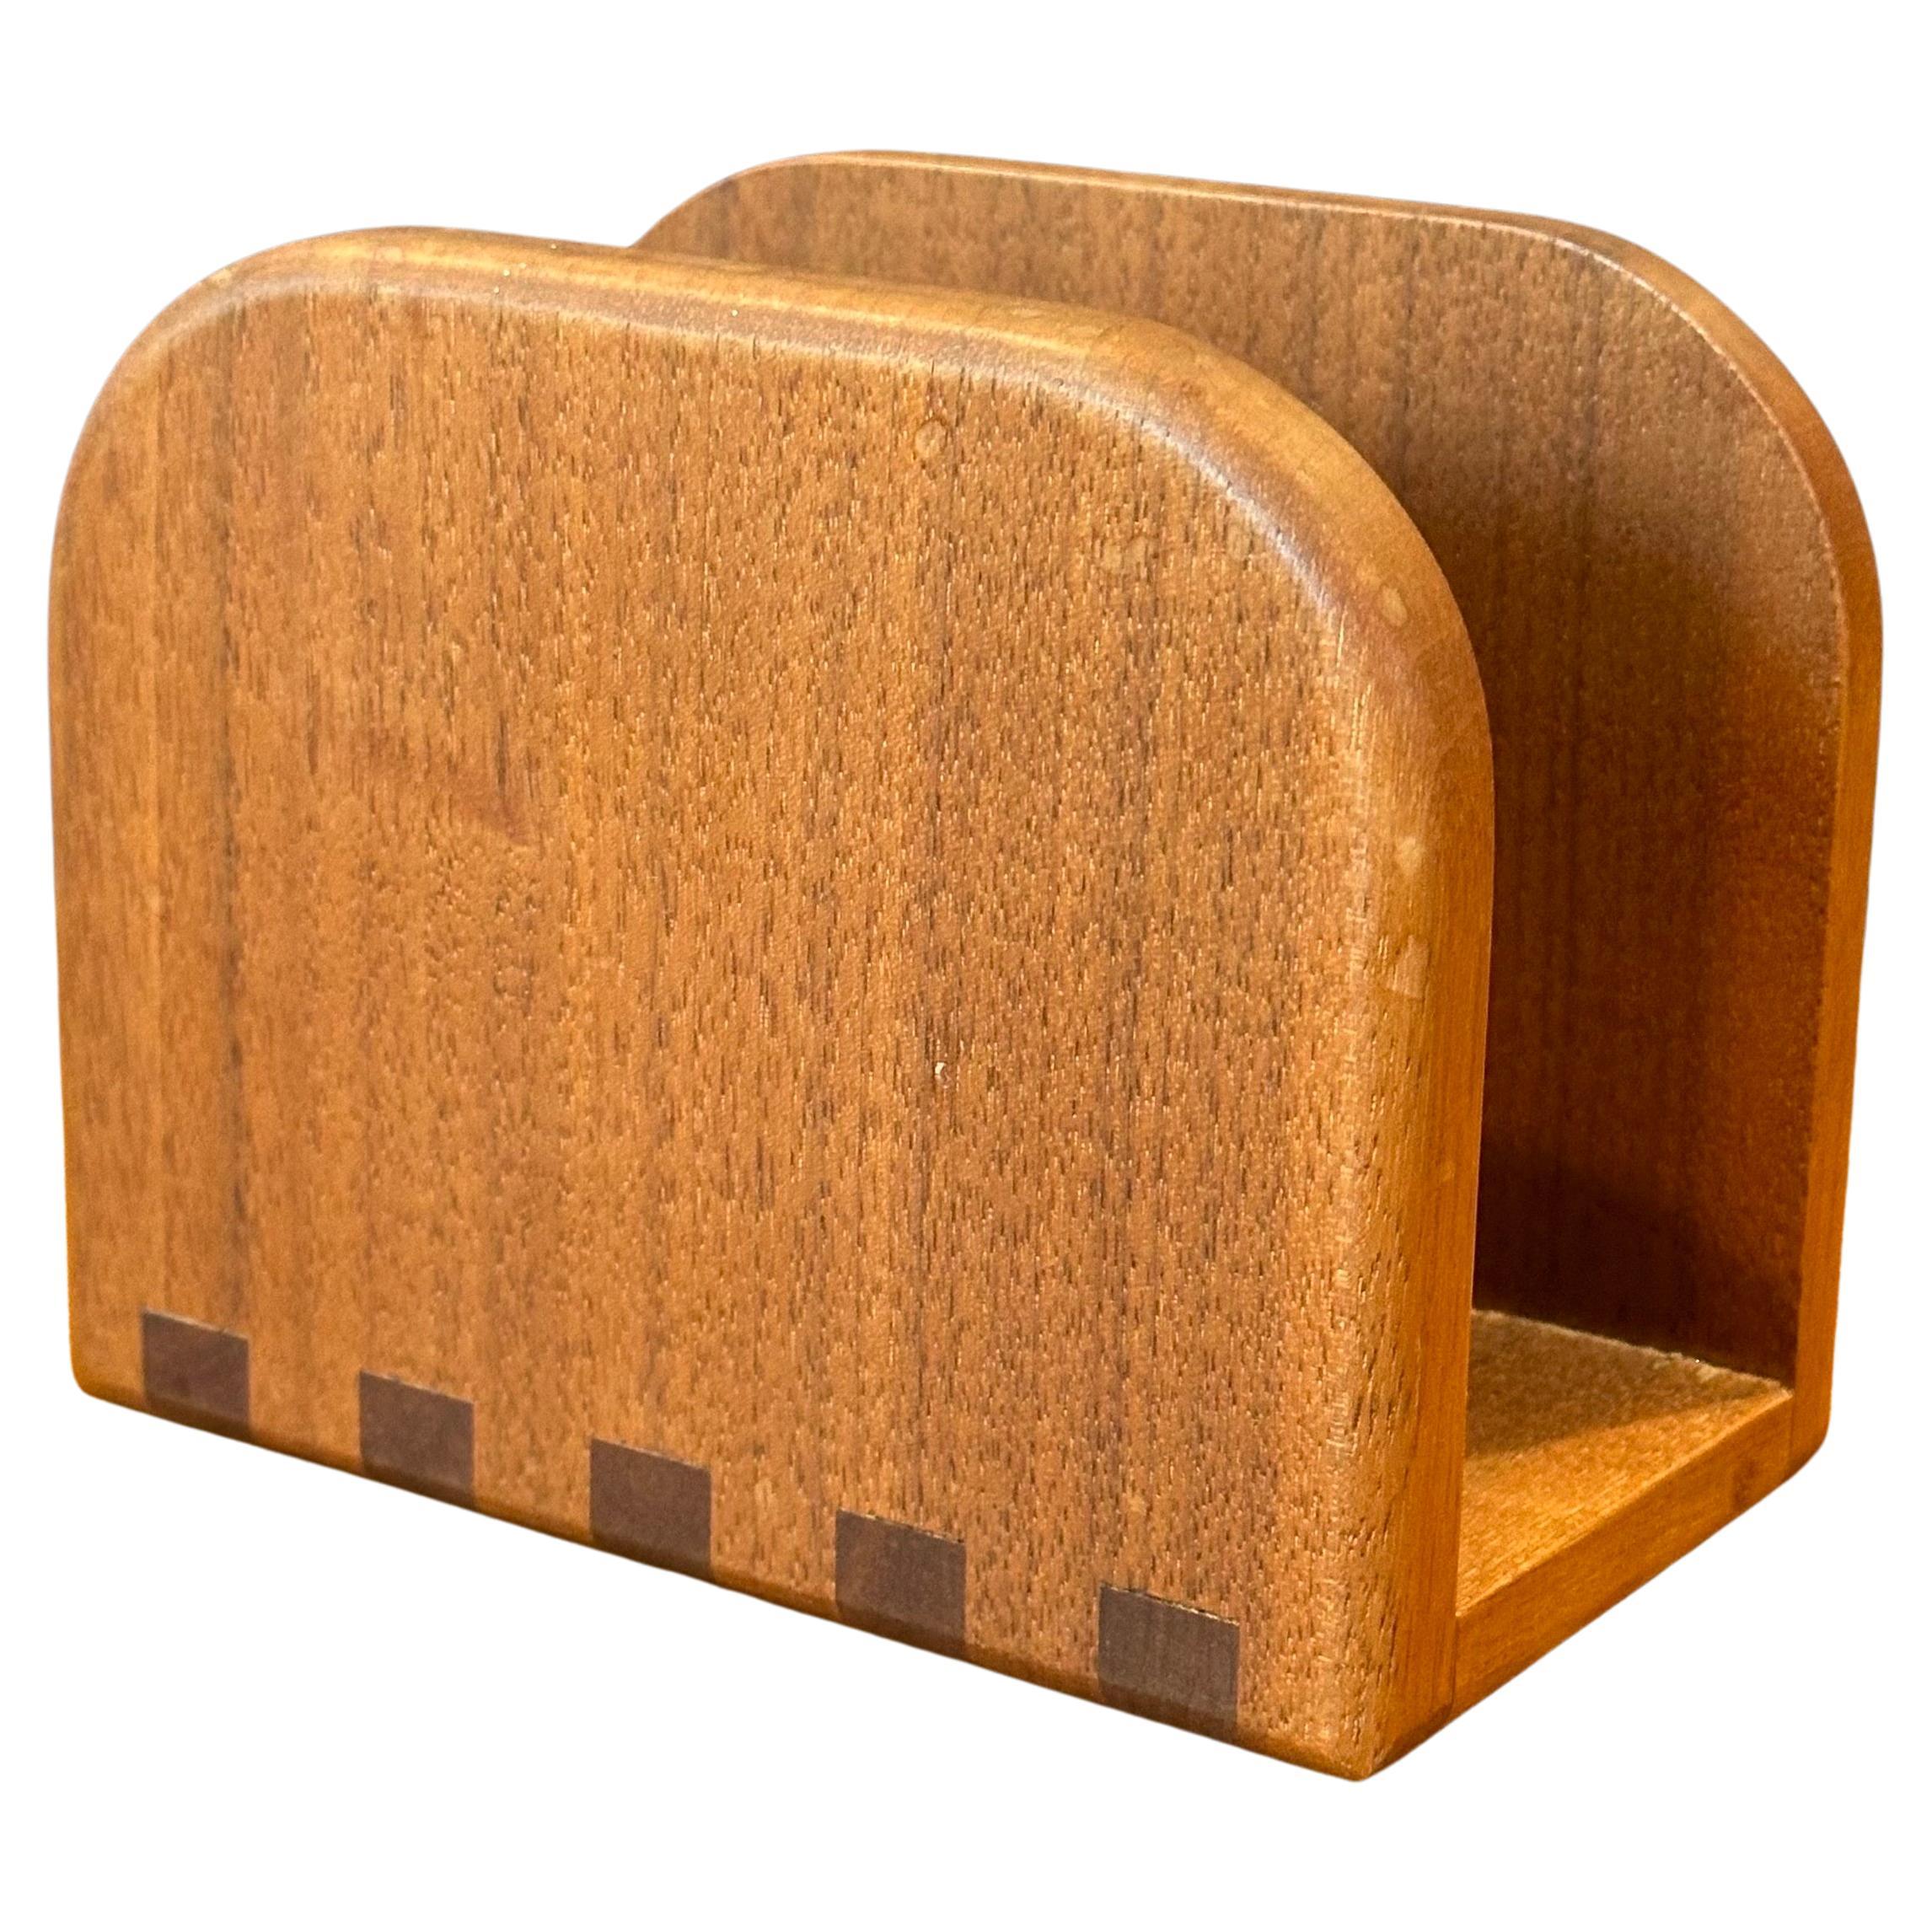 A very cool and unique Danish modern teak and walnut napkin holder, circa 1970s. The piece is in very well crafted, in good vintage condition and measures 5.75